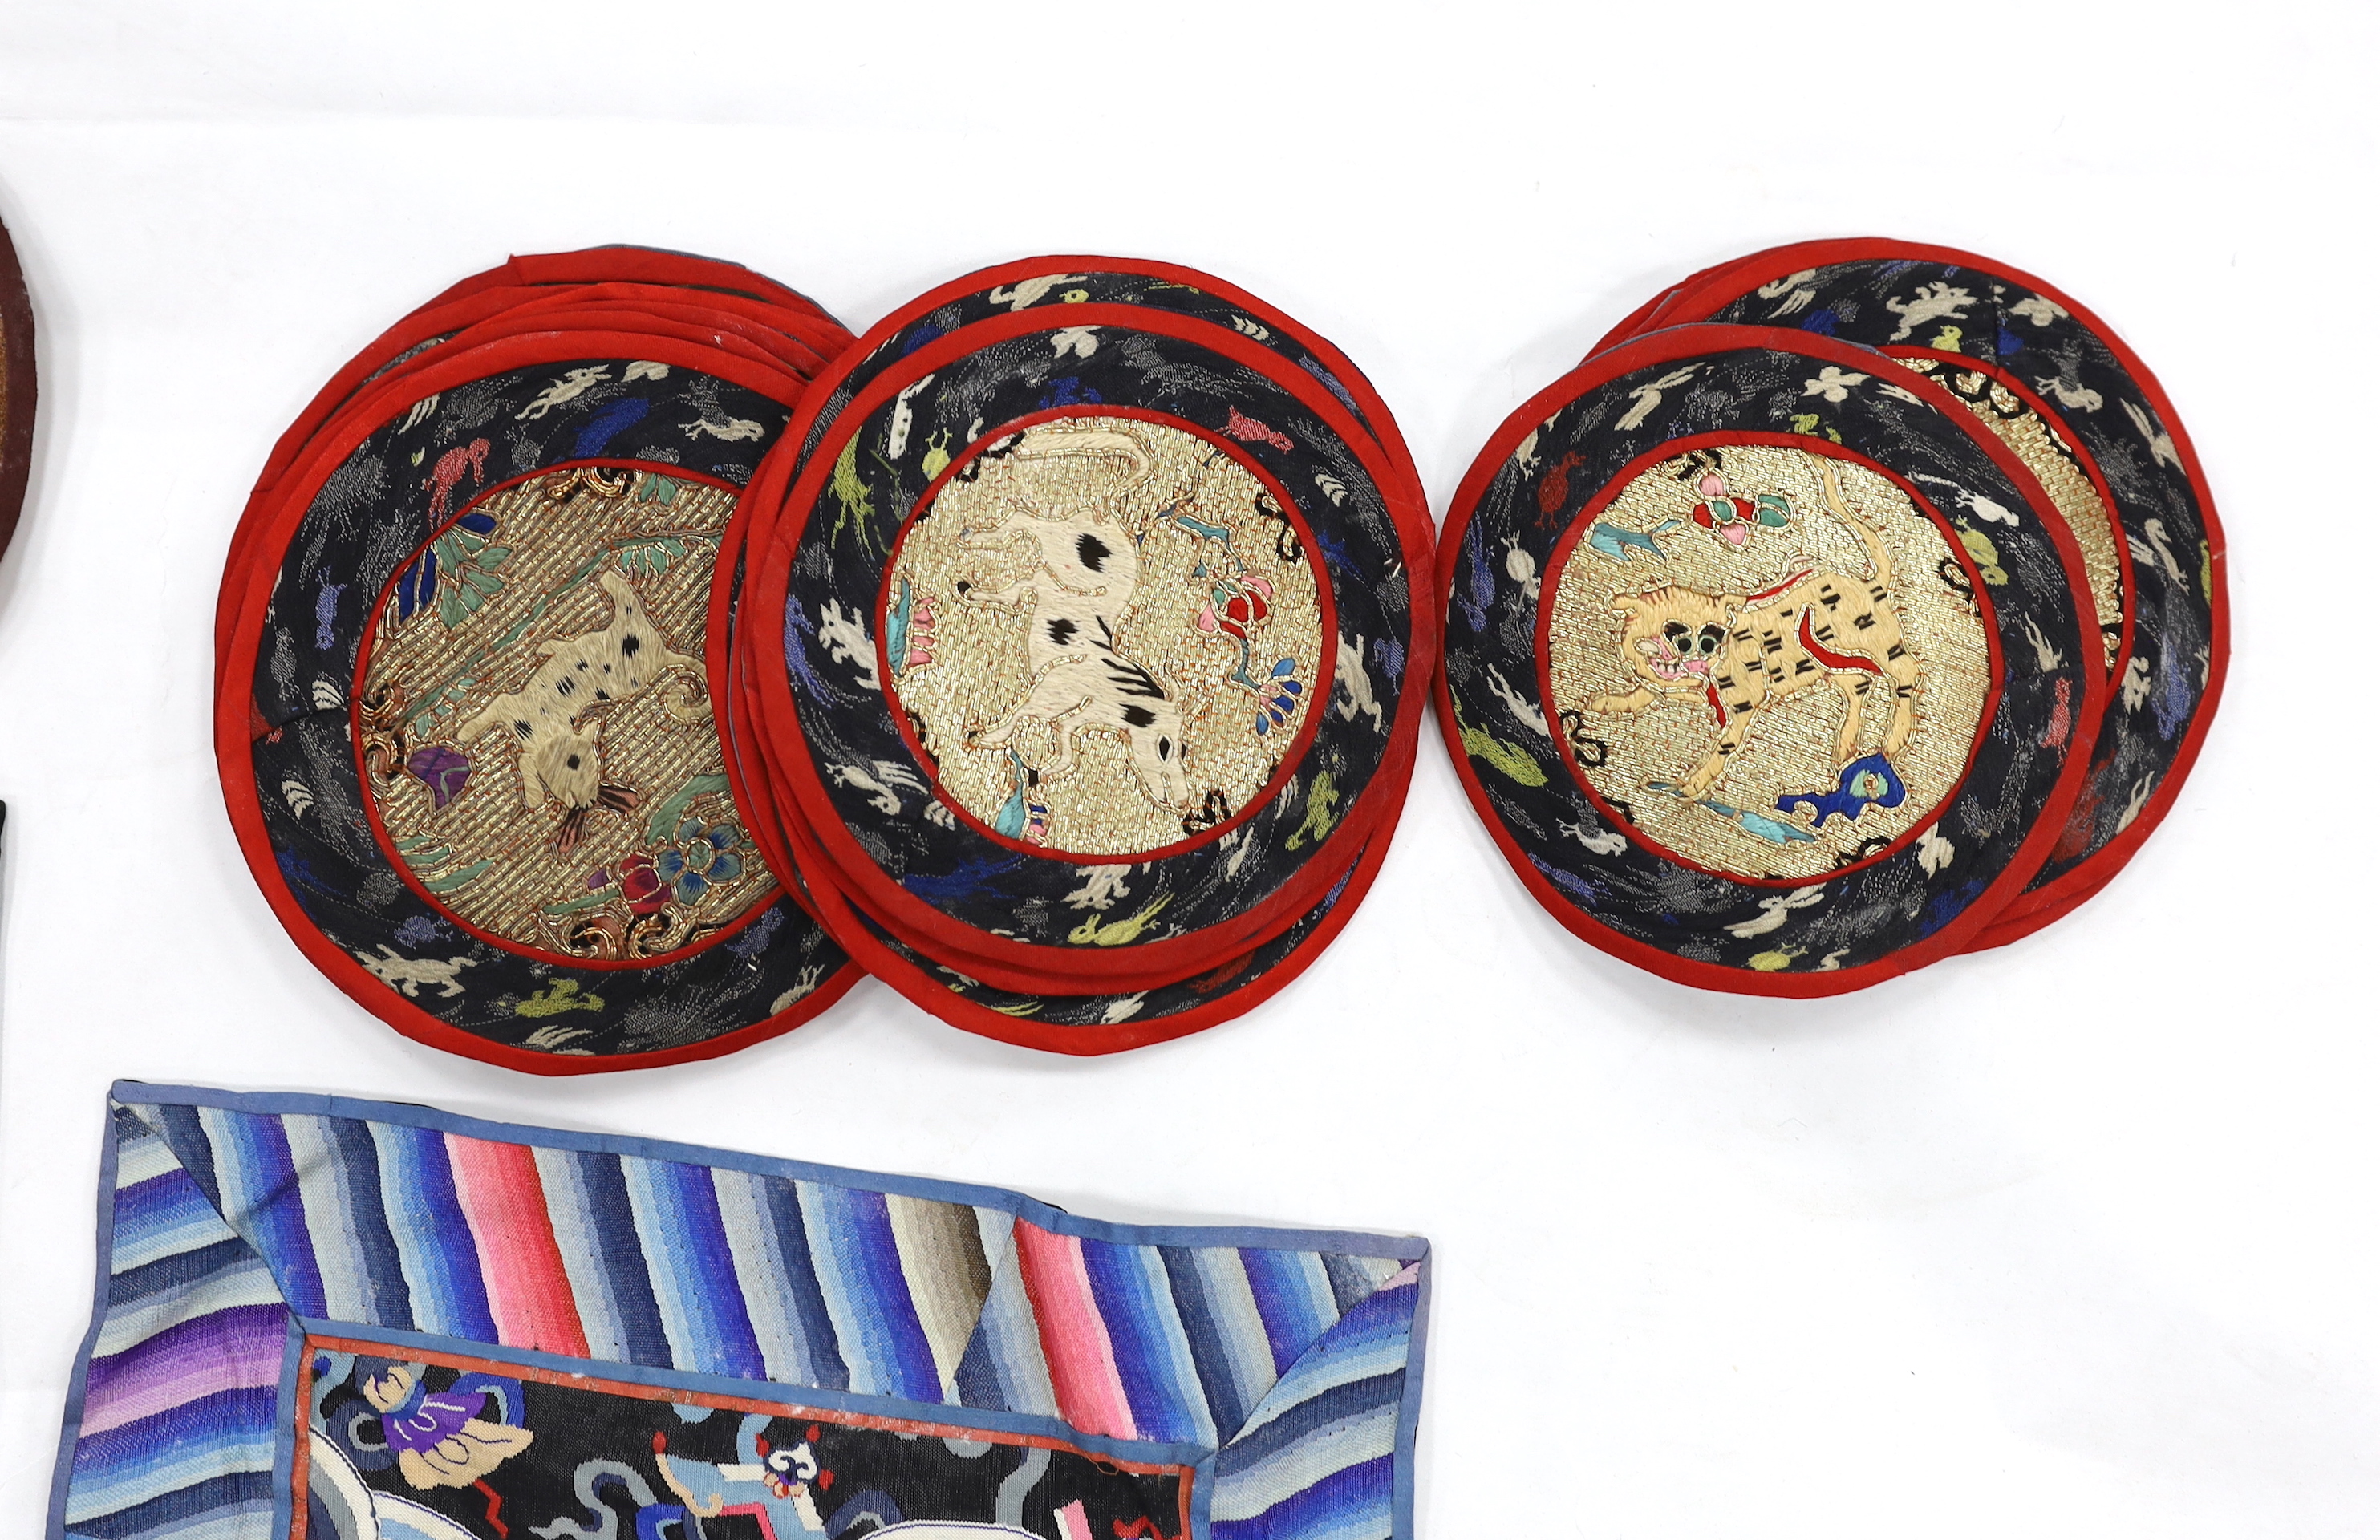 A Kesi Chinese woven panel, a Beijing knot mat, two other embroidered panels, a circular mat together with two sets of six circular mats with gold thread embroidery of animals